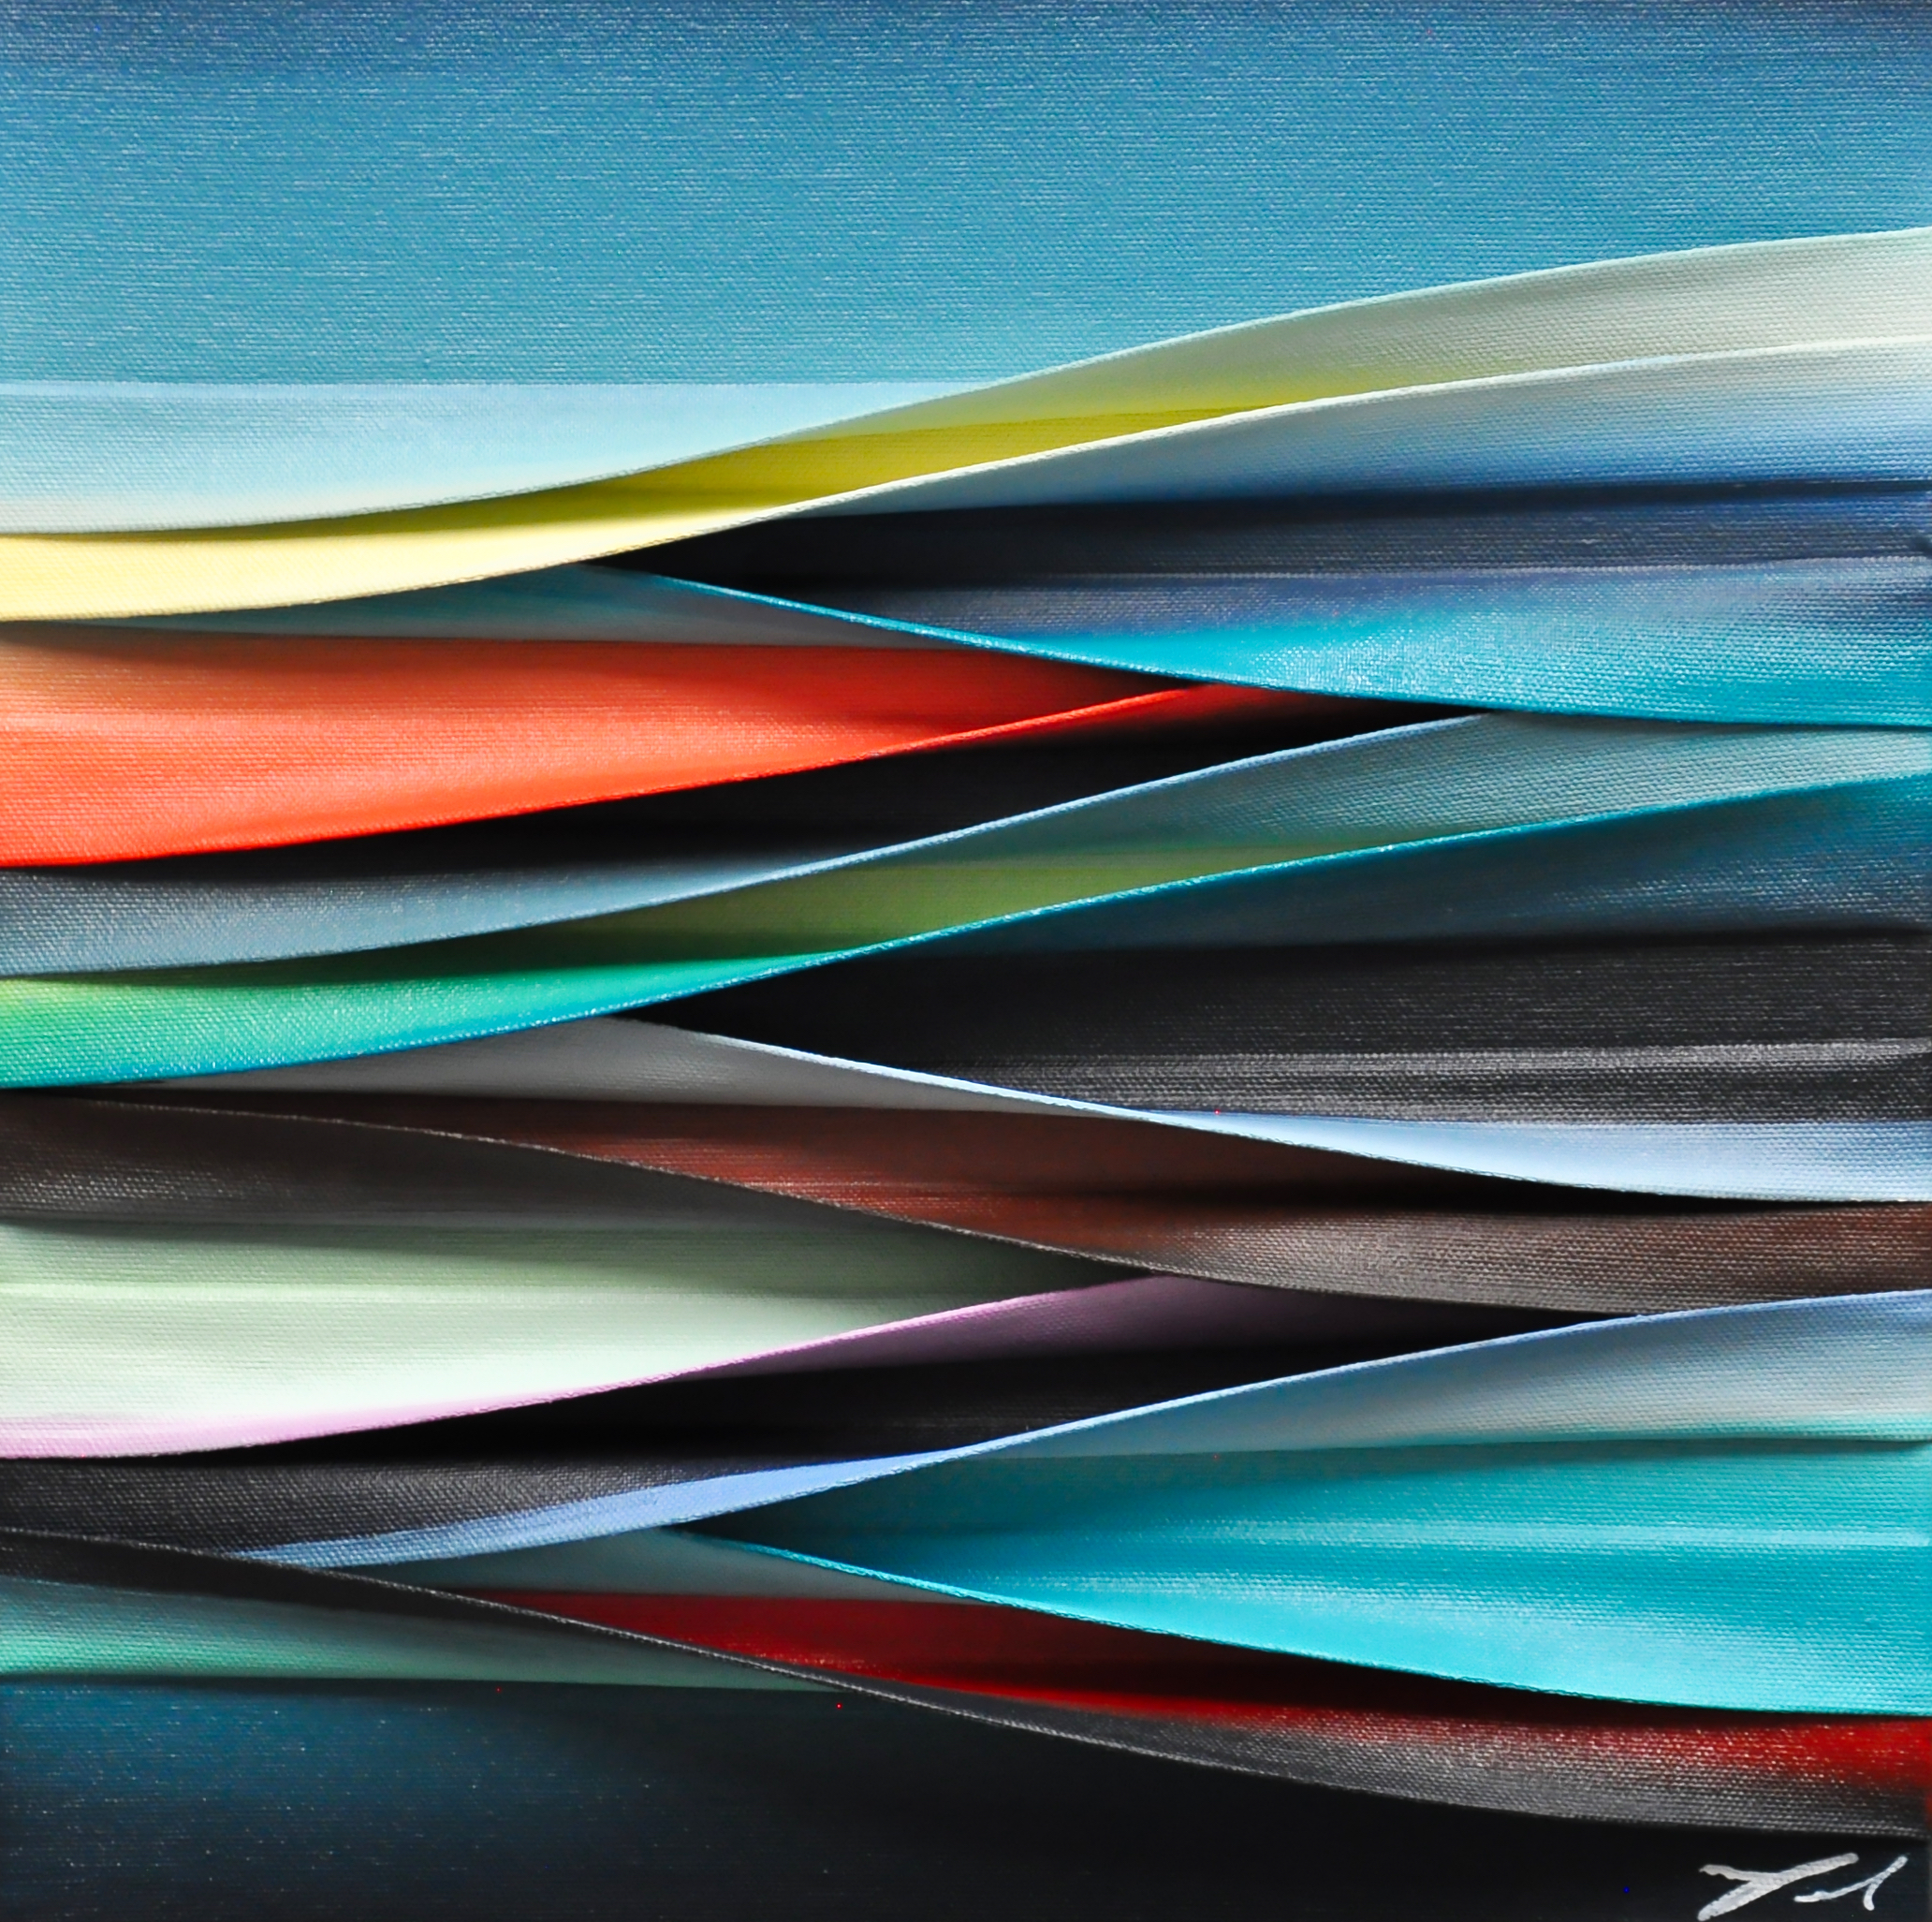 Se laisser tenter, original 3-D mixed media abstract painting by Melanie Giguere at Effusion Art Gallery in Invermere, BC